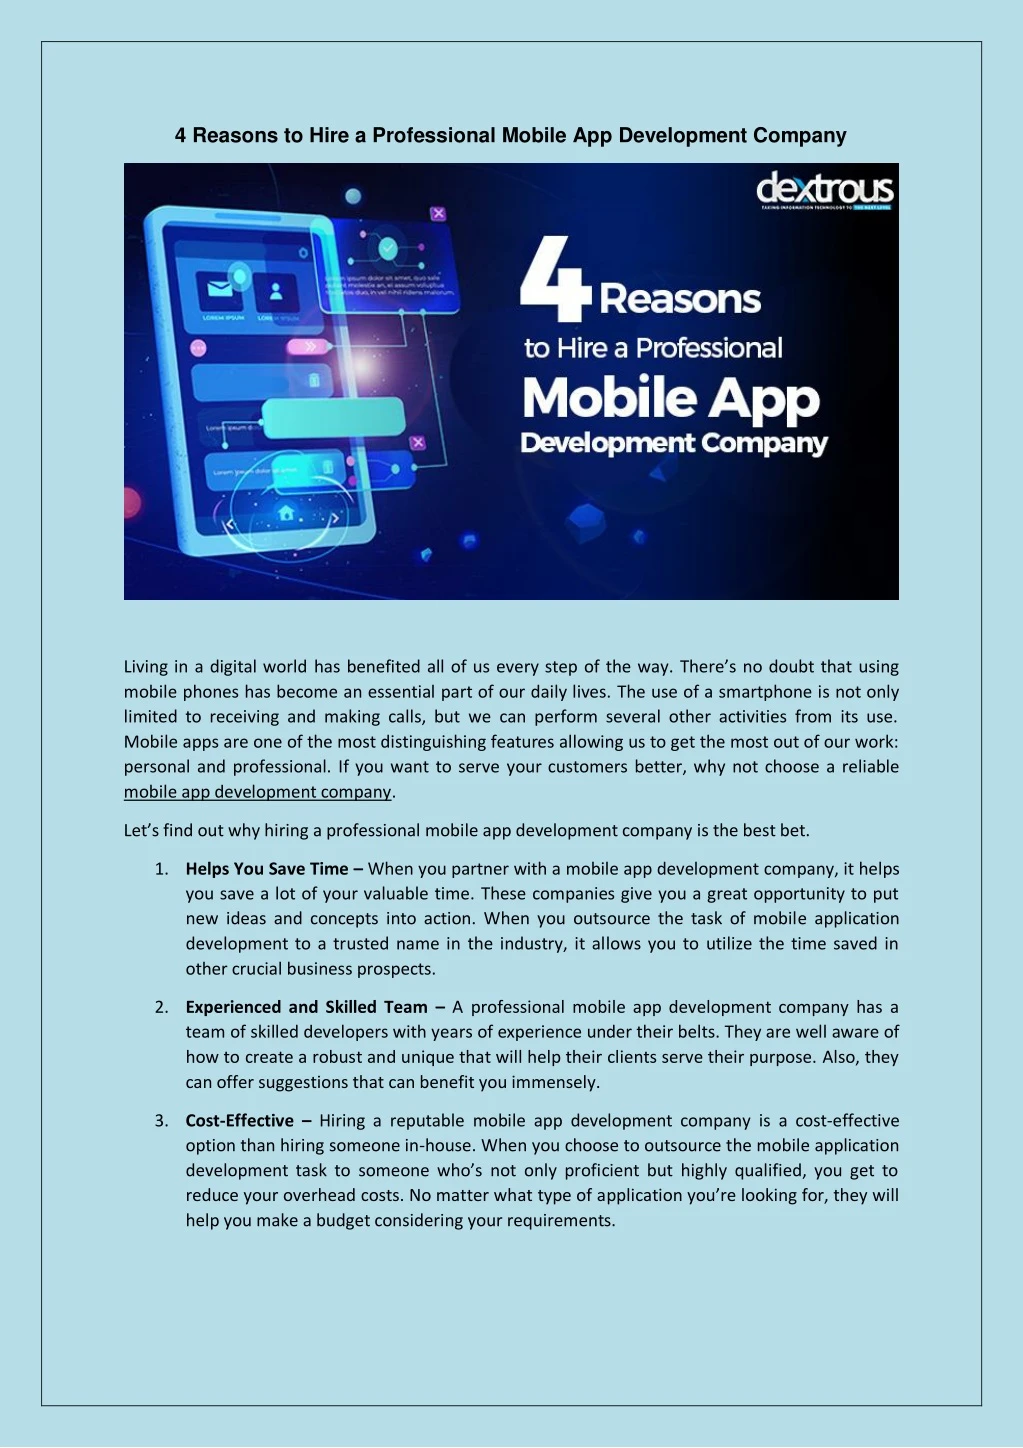 4 reasons to hire a professional mobile